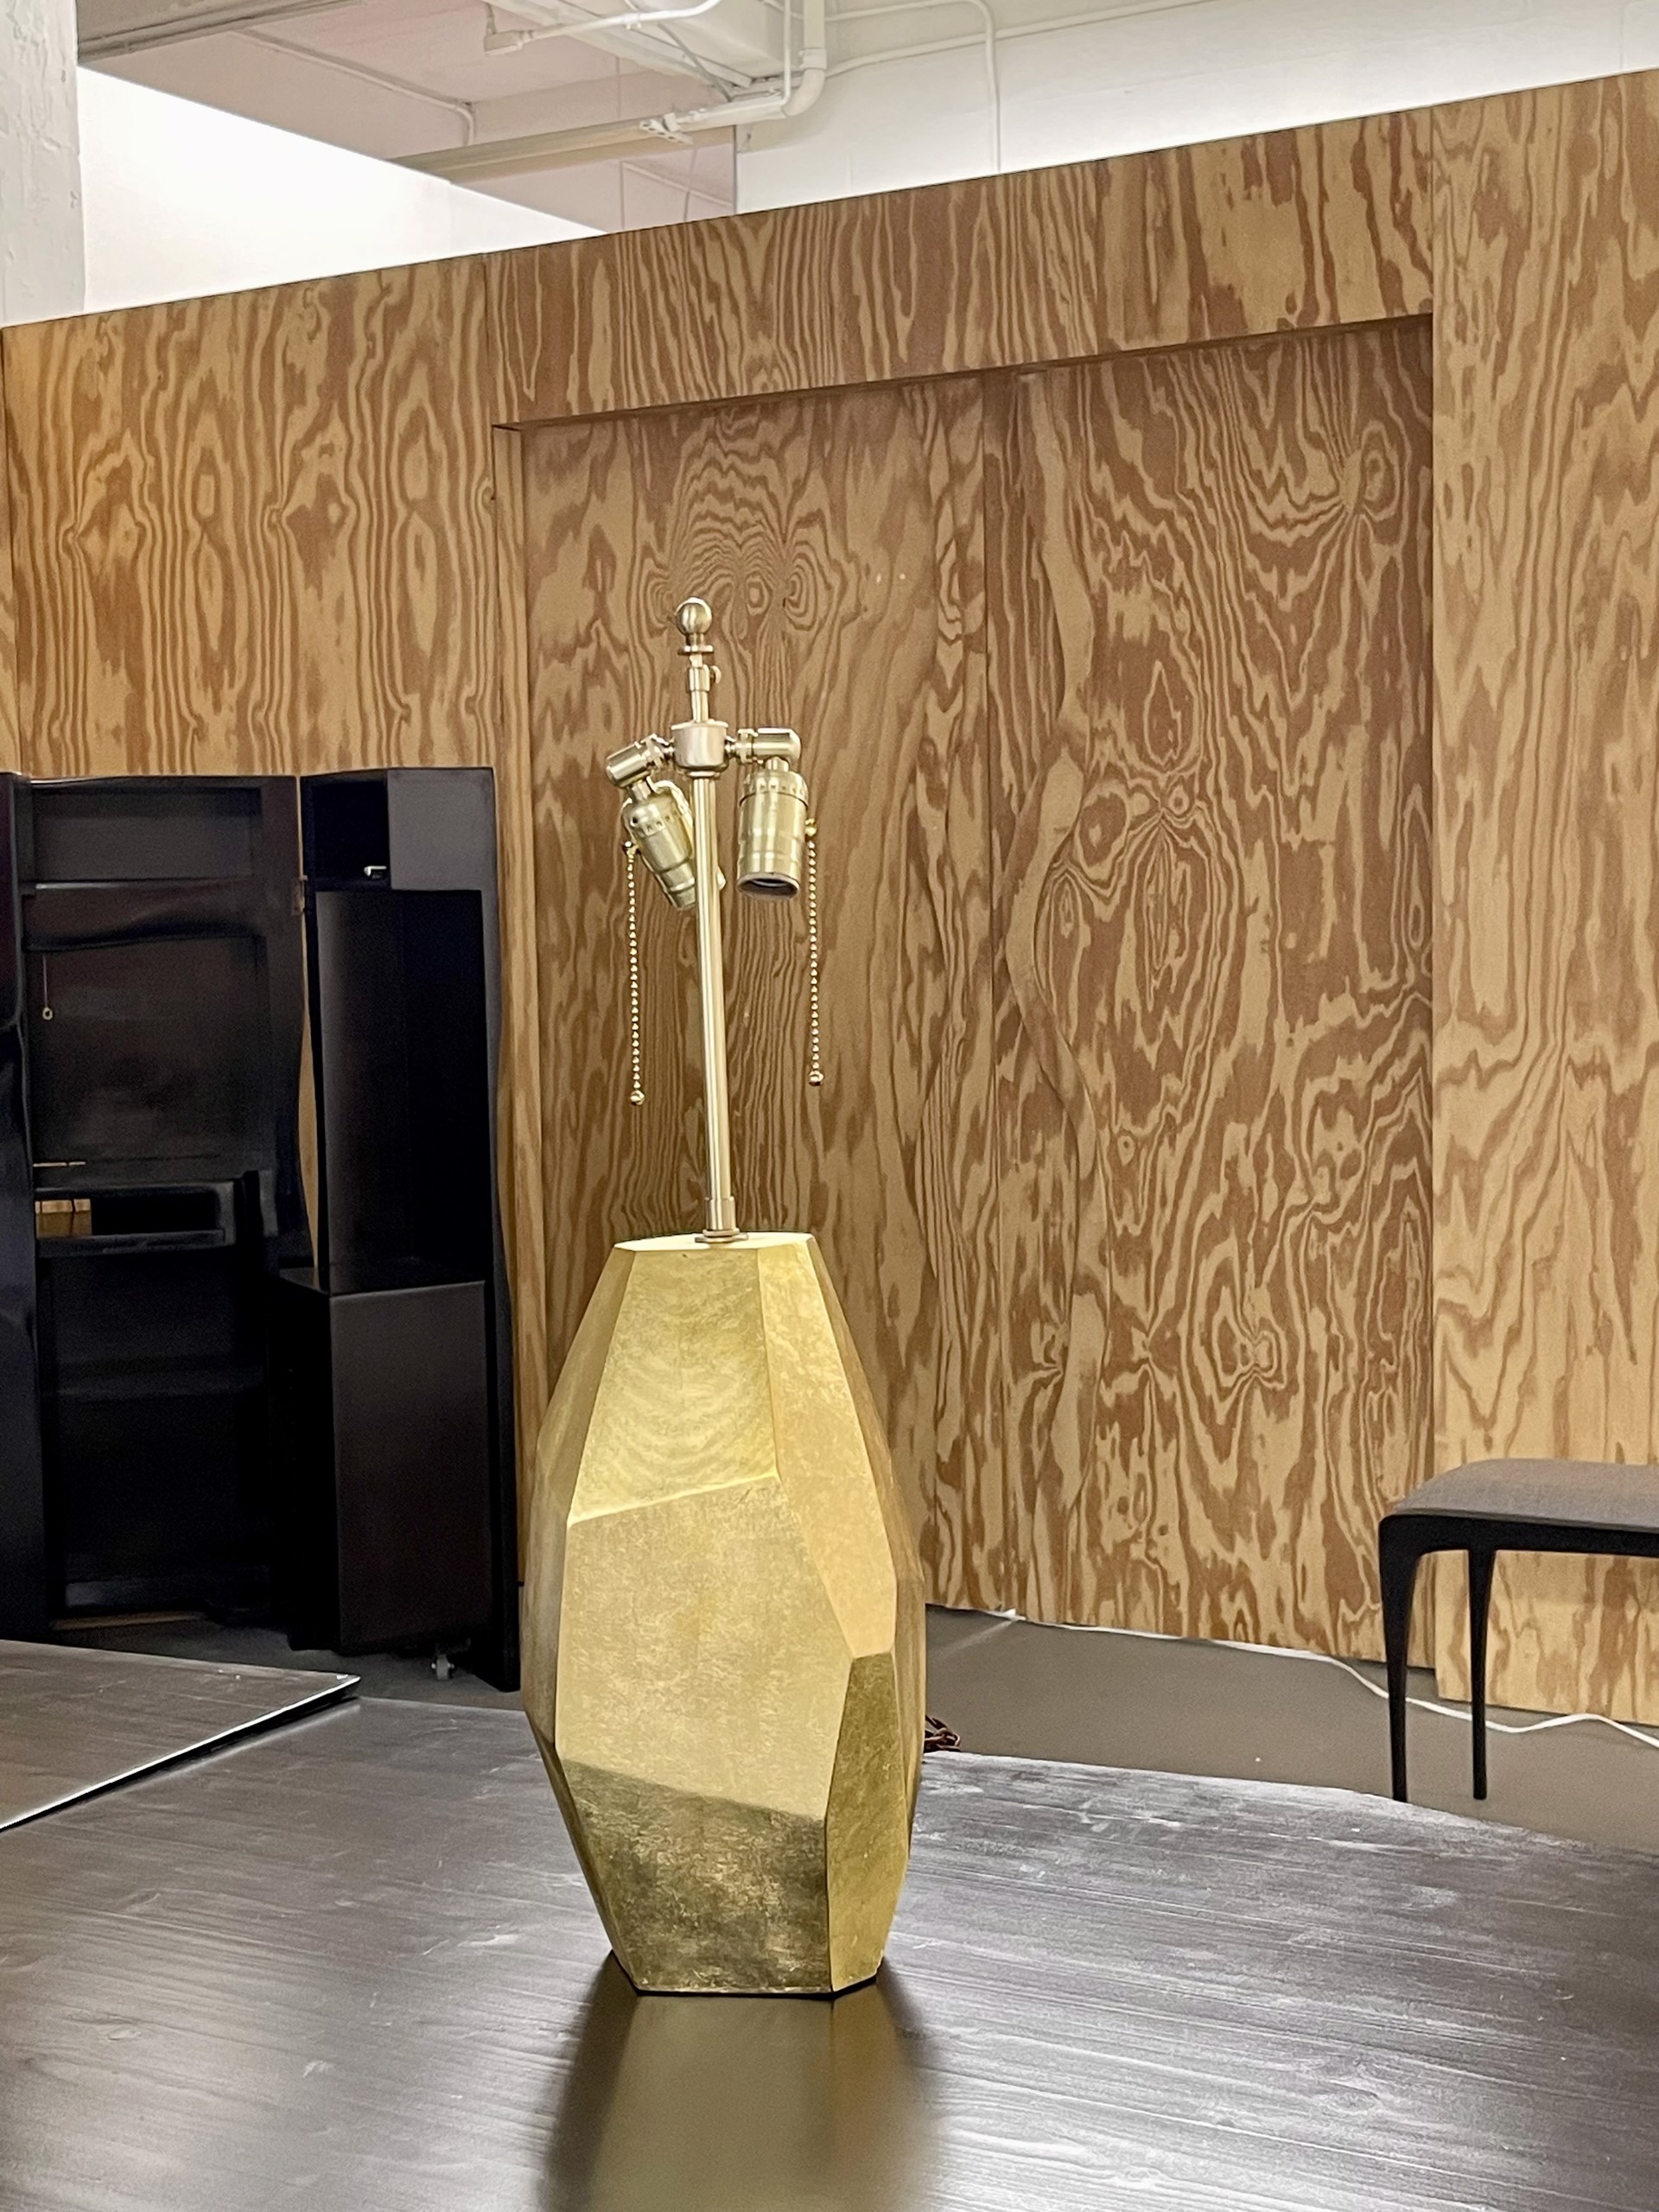 Large gilded table lamp "Nazca" by Jacques Jarrige